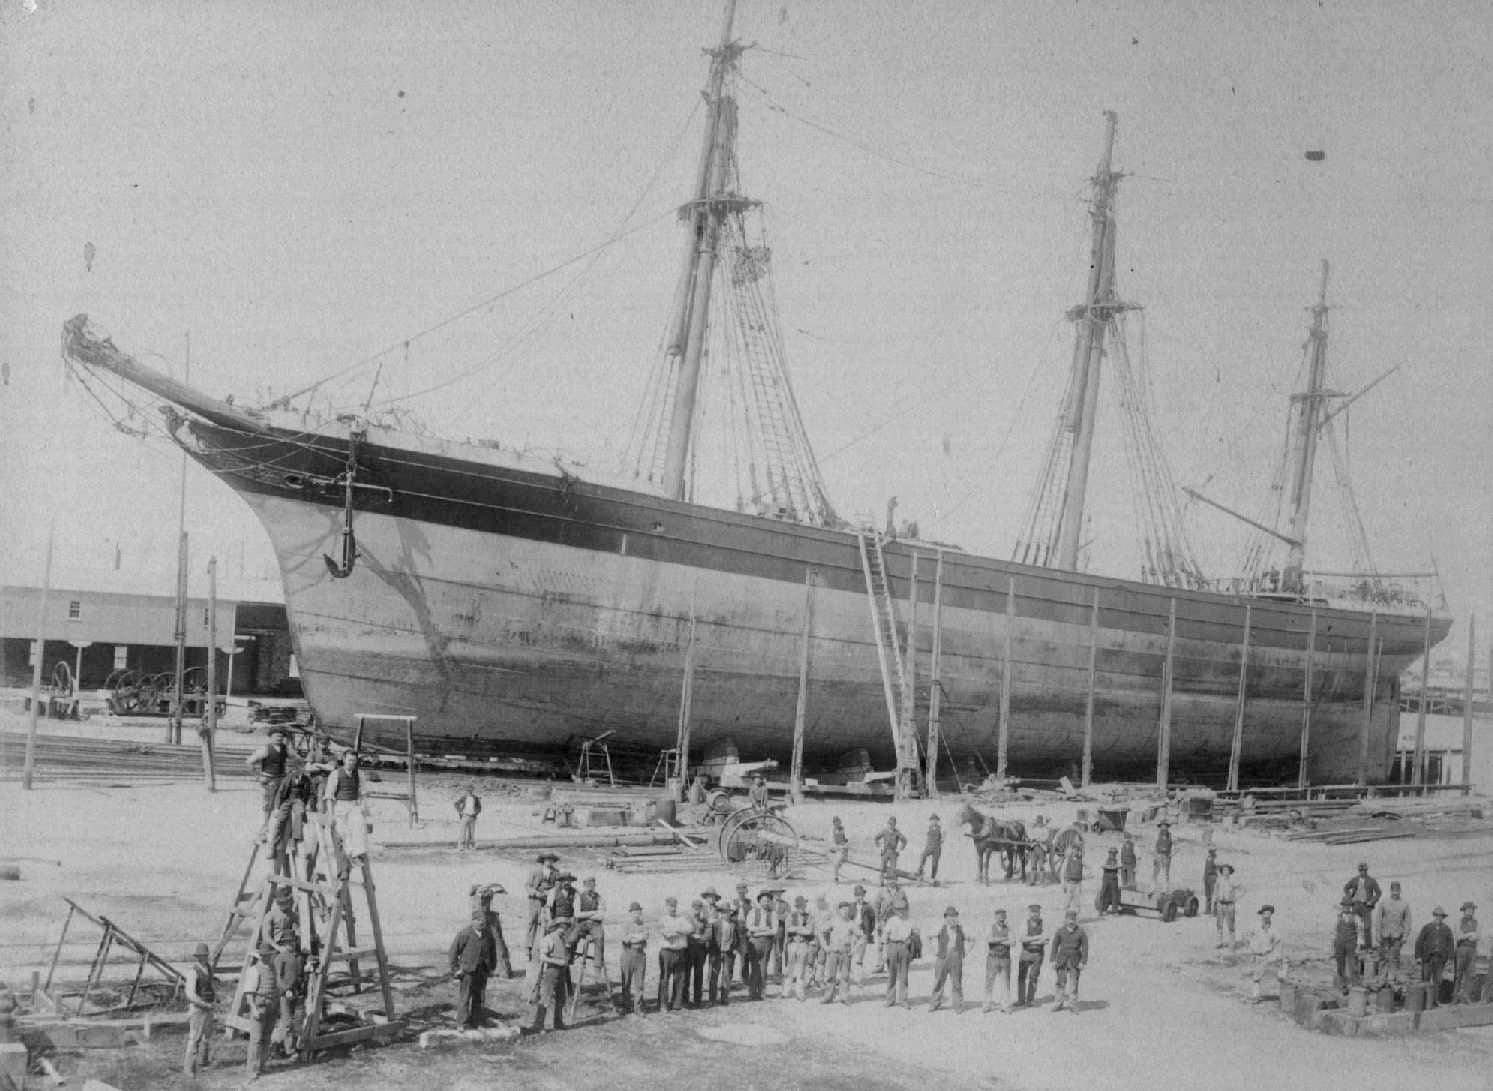 Barque, "Theophane", built in 1868 at Liverpool by R.J. Evans & Co.  Owned by Australasian shipping Co 
Official Number:  58919
Tonnage:  1587 gross
Dimensions:  length 248', breadth 39', draught 24'
Port Of Registry:  Liverpool

This image shows ve